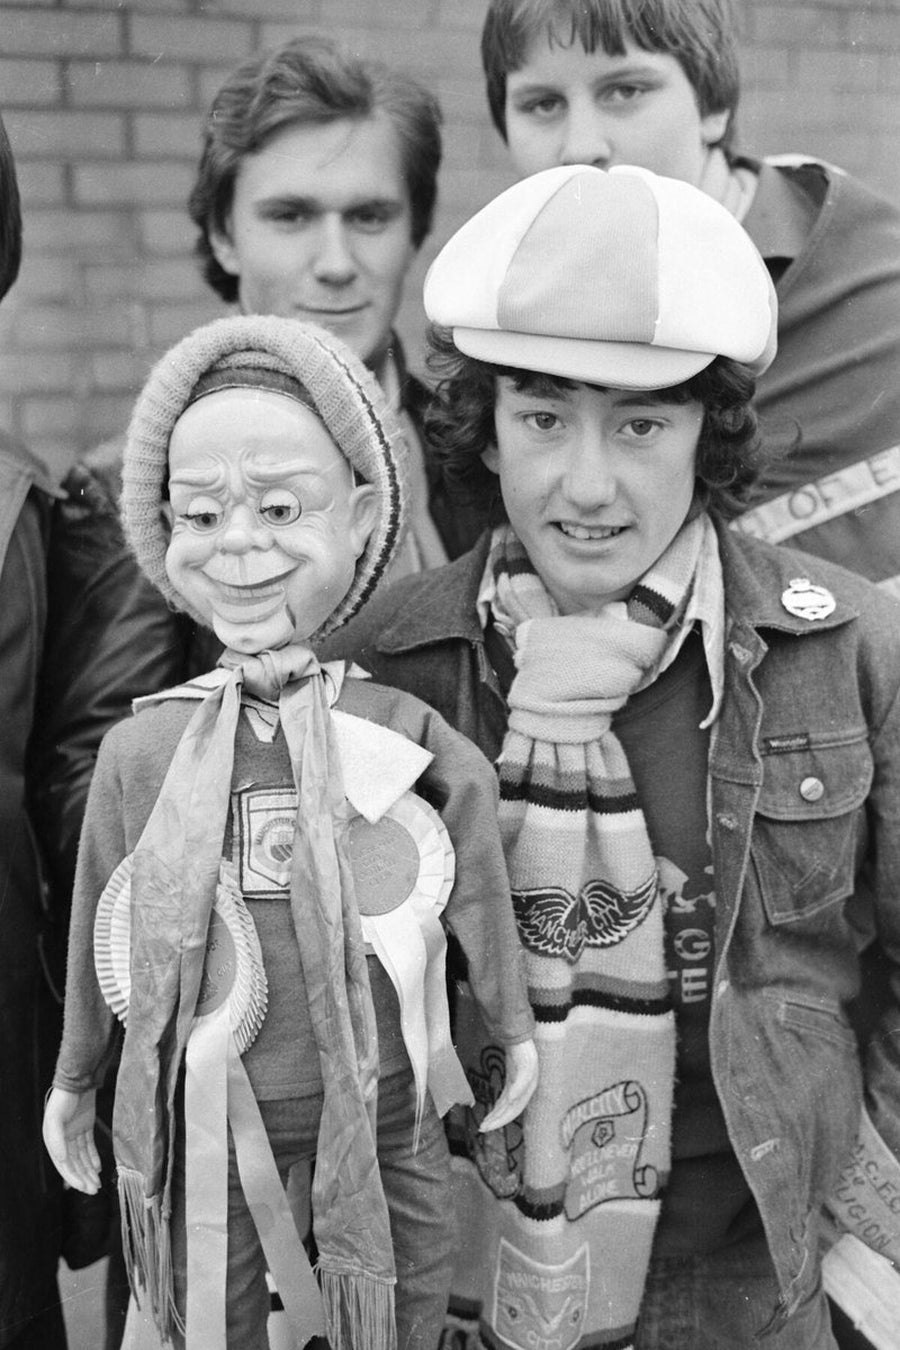 Manchester City Fan with a Ventriloquist Dummy by Iain SP Reid - c. 1976